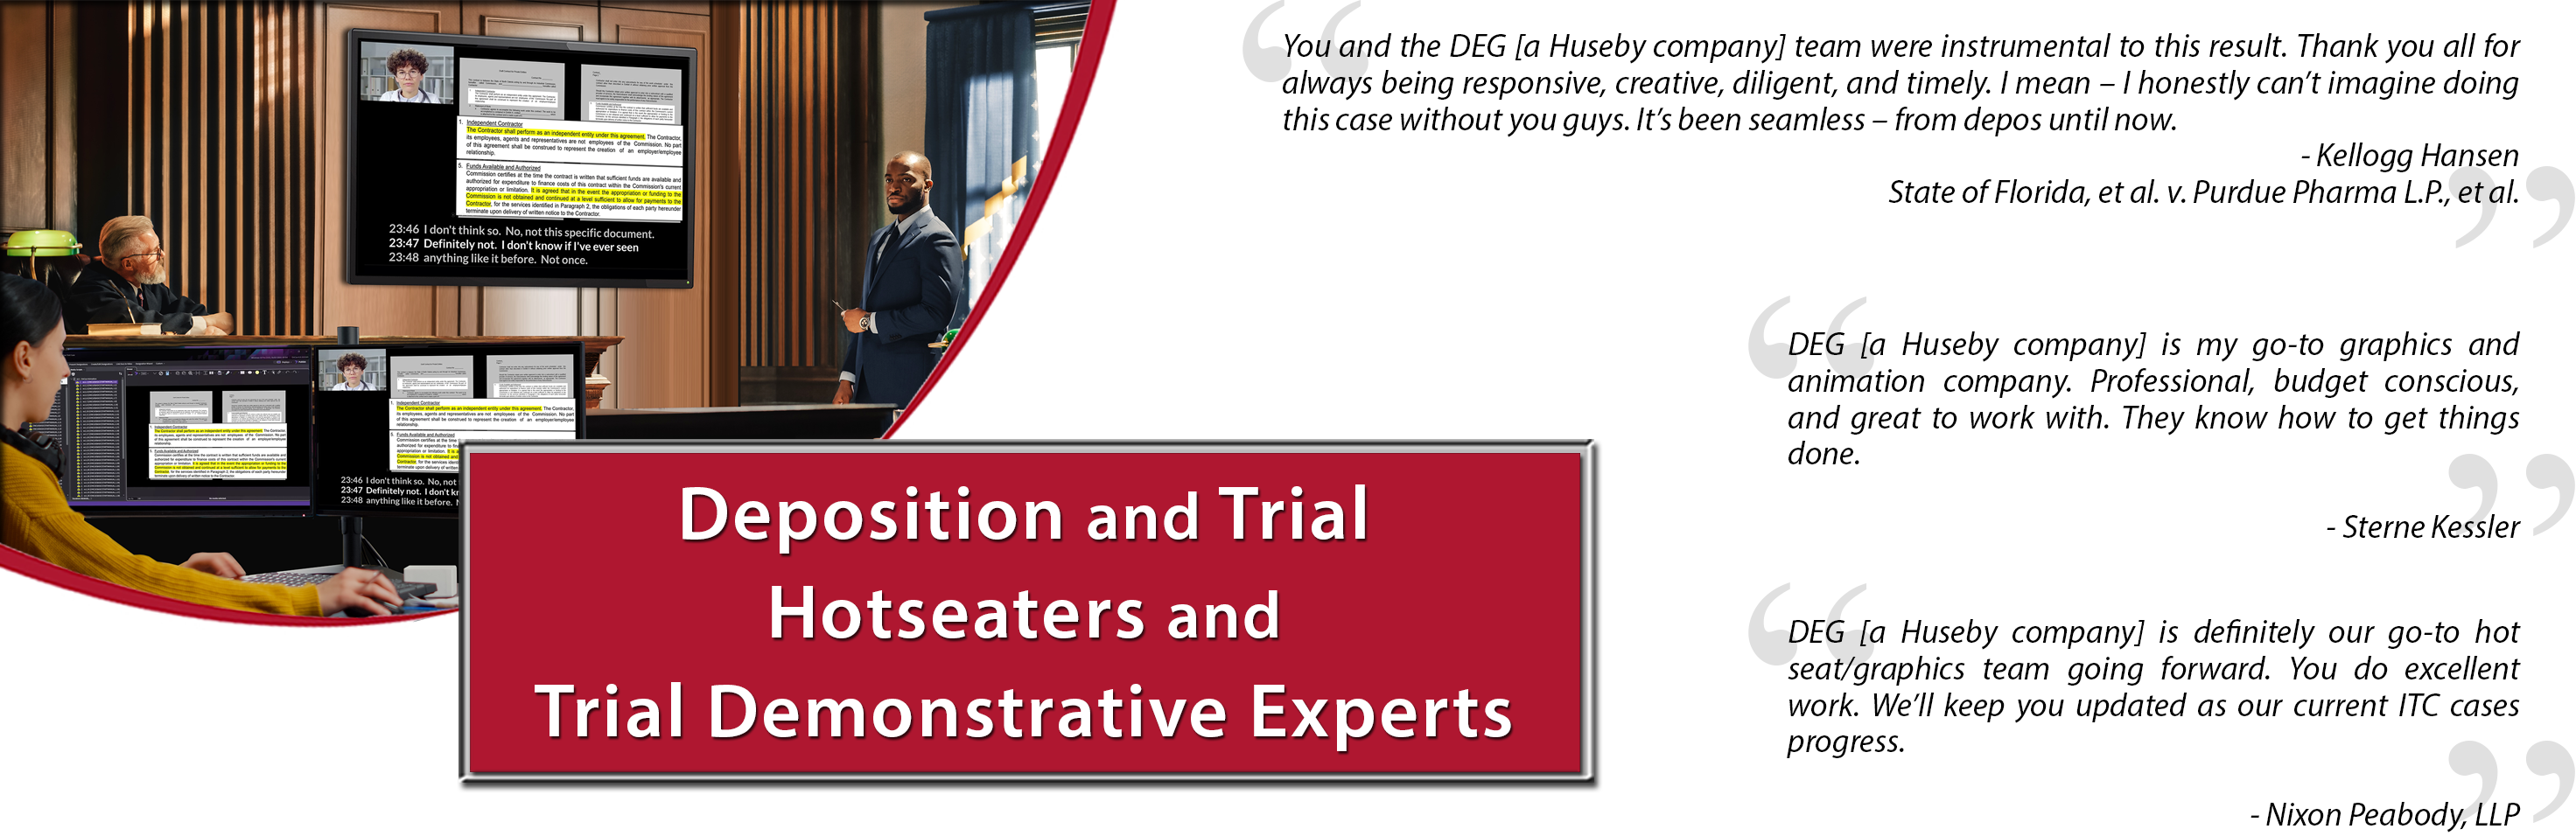 Huseby Hotseaters and Trial Demonstrative Experts